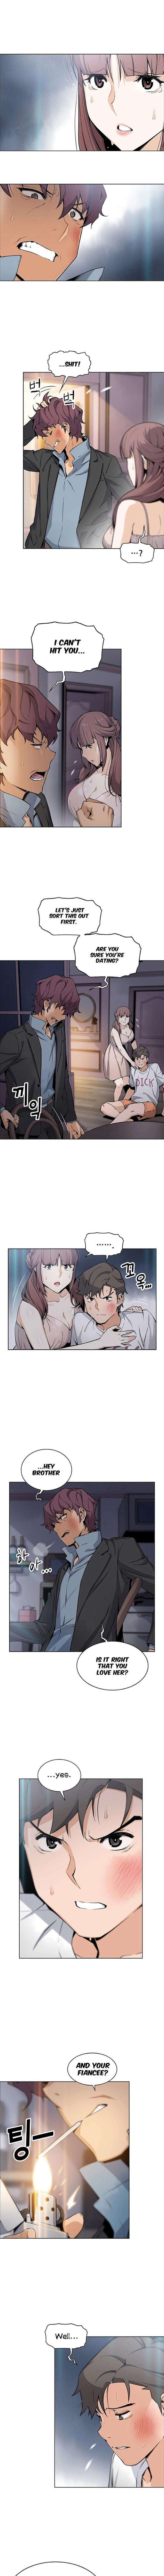 Housekeeper [Neck Pillow, Paper] Ch.49/49 [English] [Manhwa PDF] Completed 339